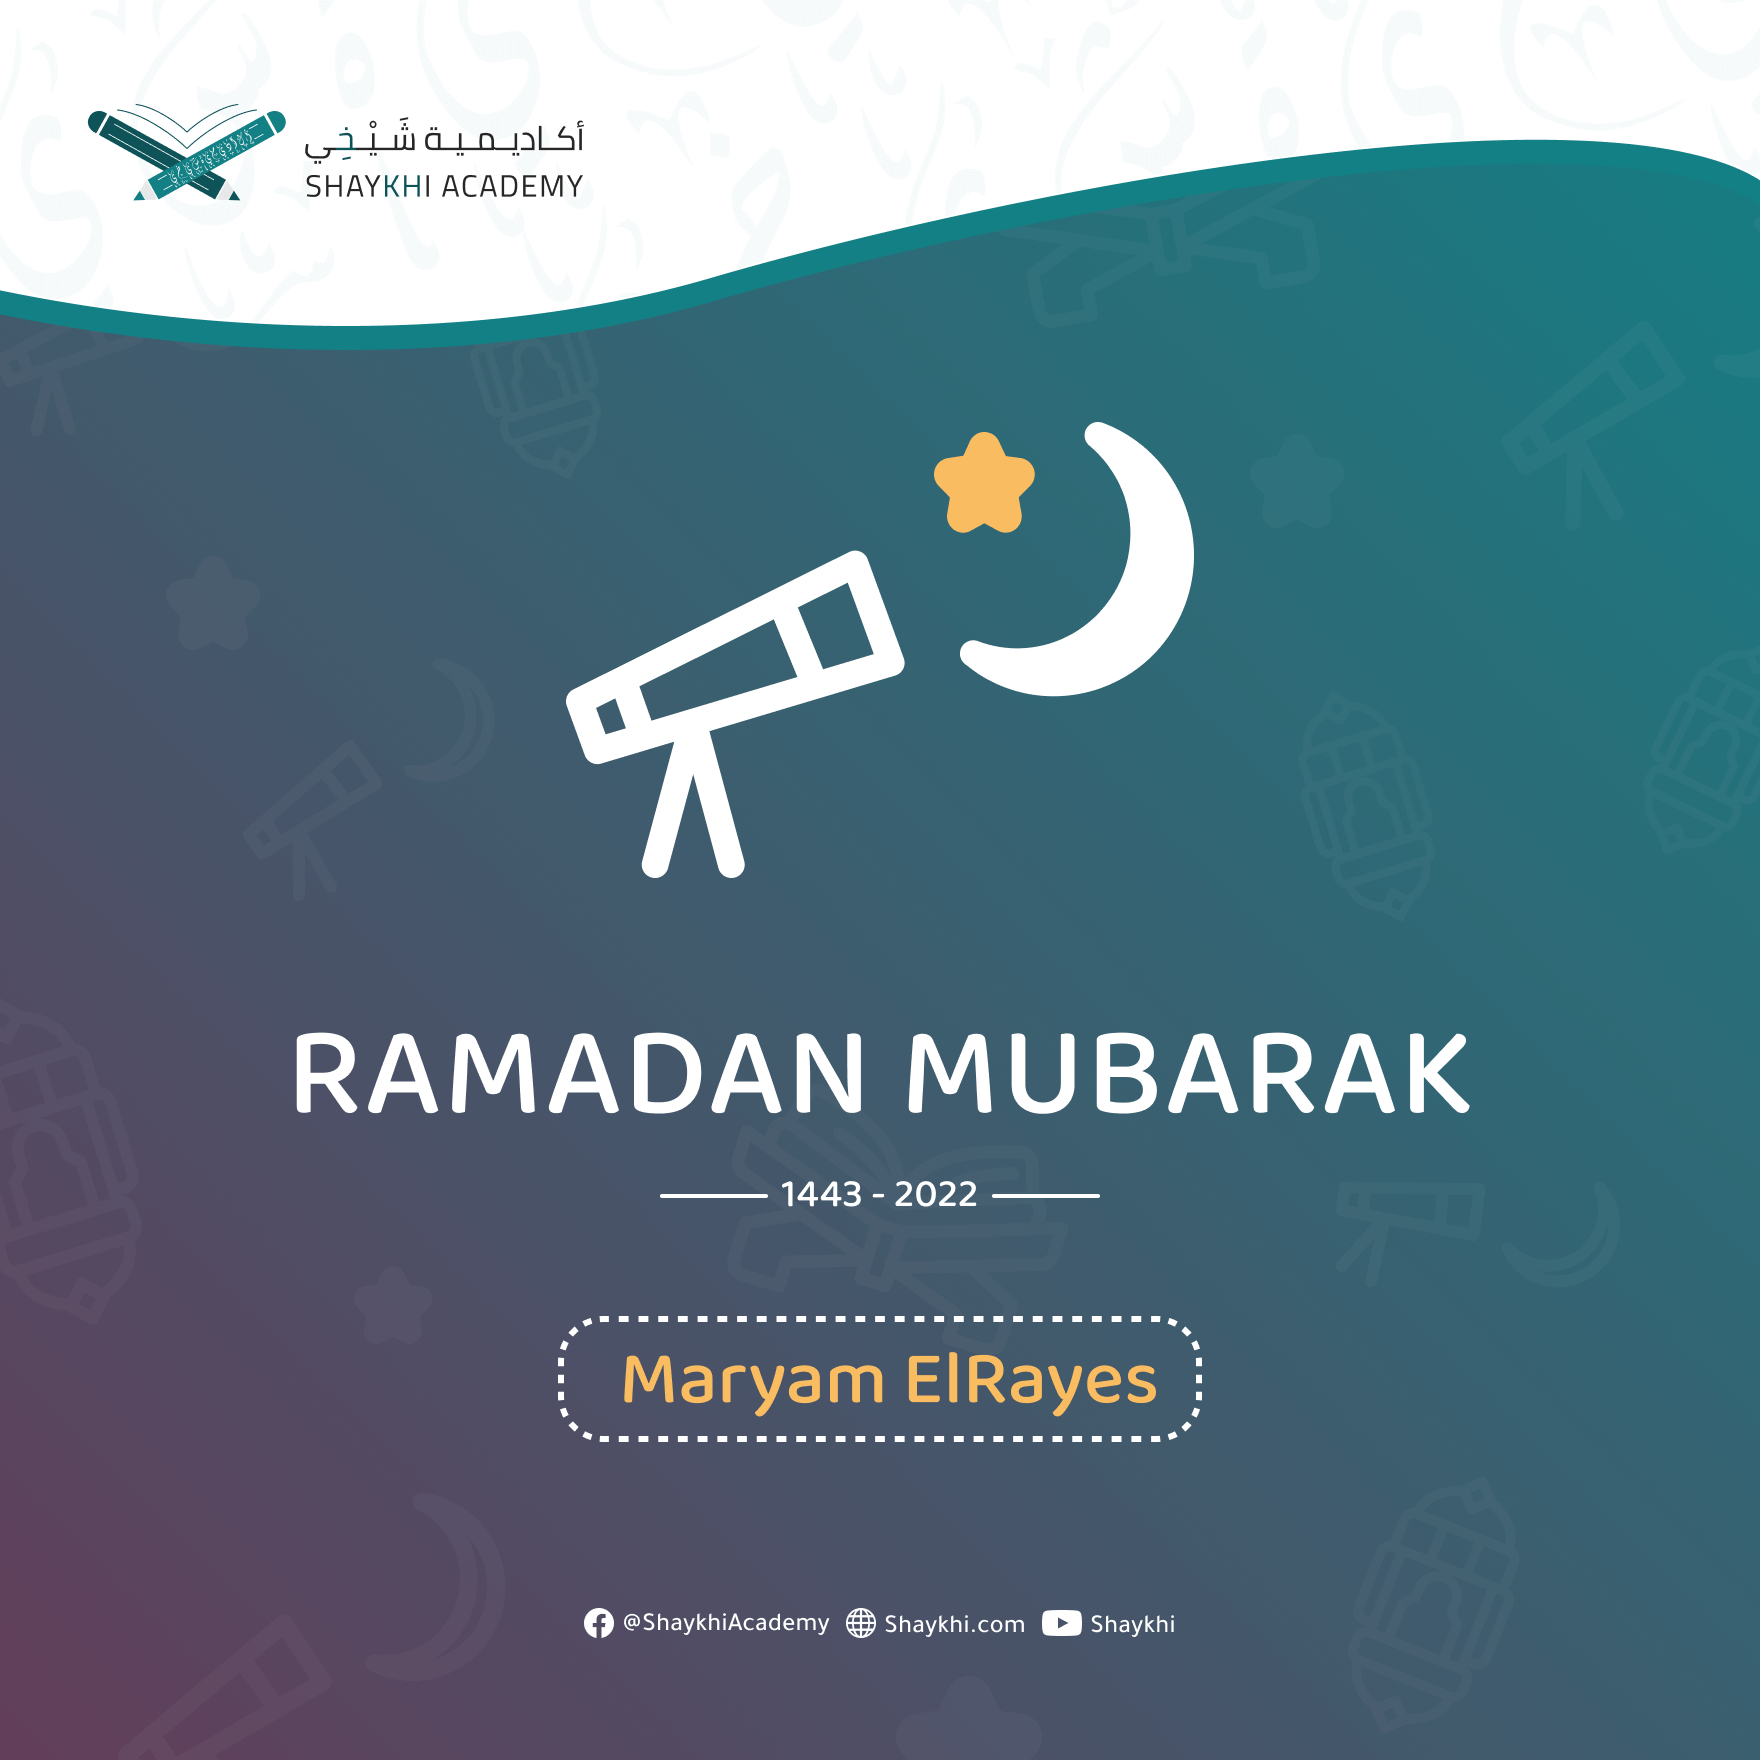 Ramadan Mubarak Images and Meaning - cards for Quran Students 11 Kids and teenagers